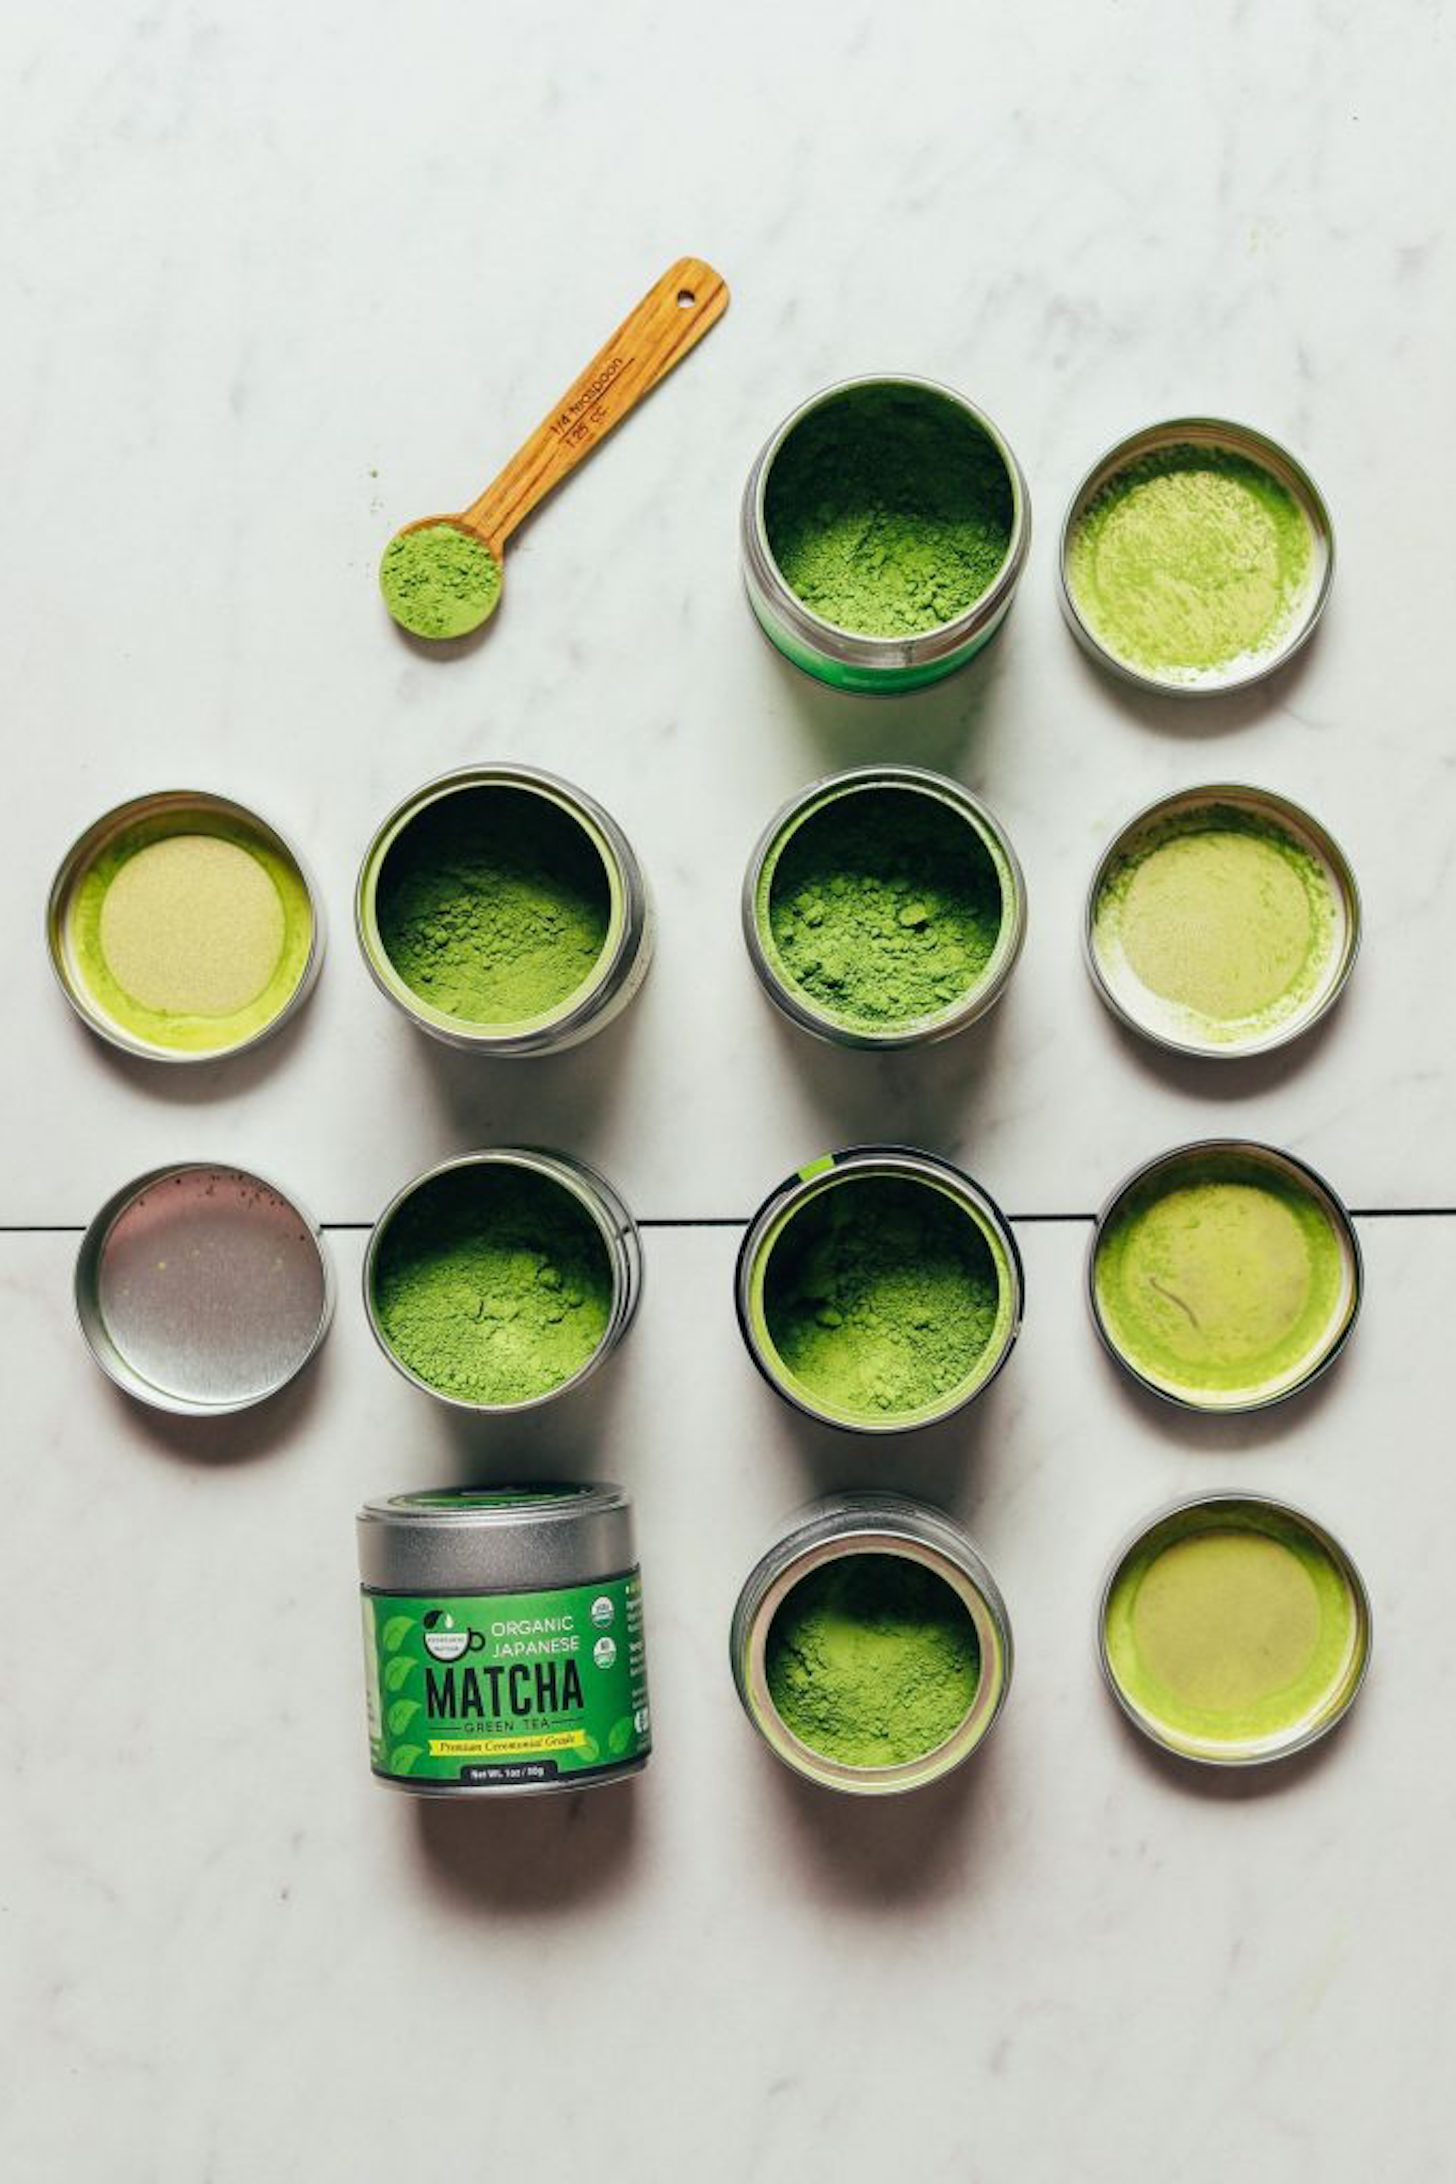 https://minimalistbaker.com/wp-content/uploads/2020/04/BEST-Matcha-Review-8-Culinary-and-8-Ceremonial-matchas-put-to-the-test-See-who-took-the-top-prize-minimalistbaker-matcha-plantbased-review-recipe-21-709x1024-1.jpg